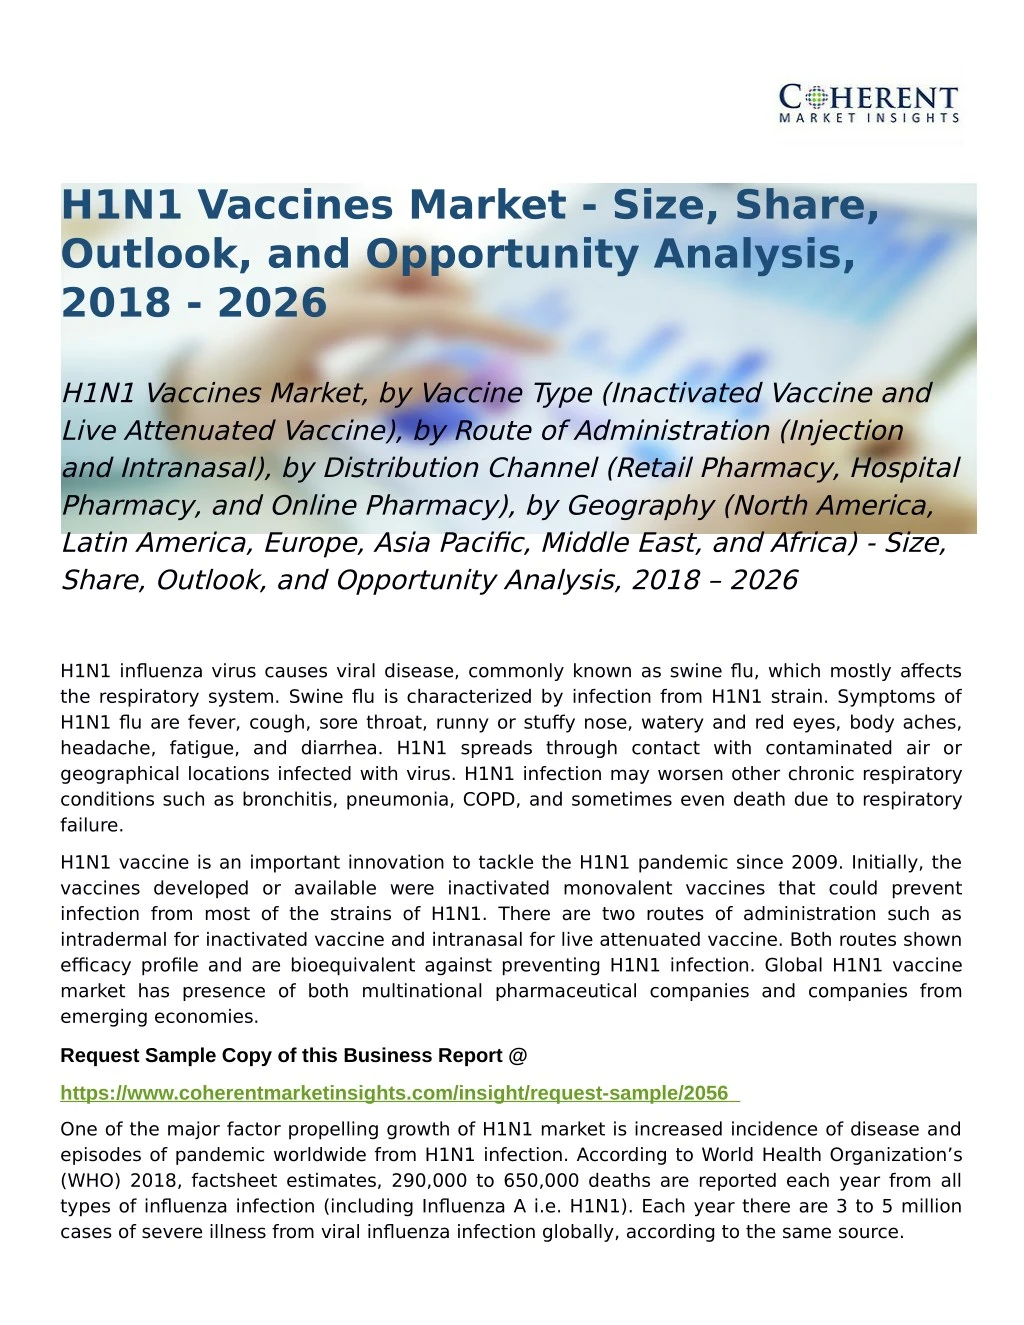 h1n1 vaccines market size share outlook